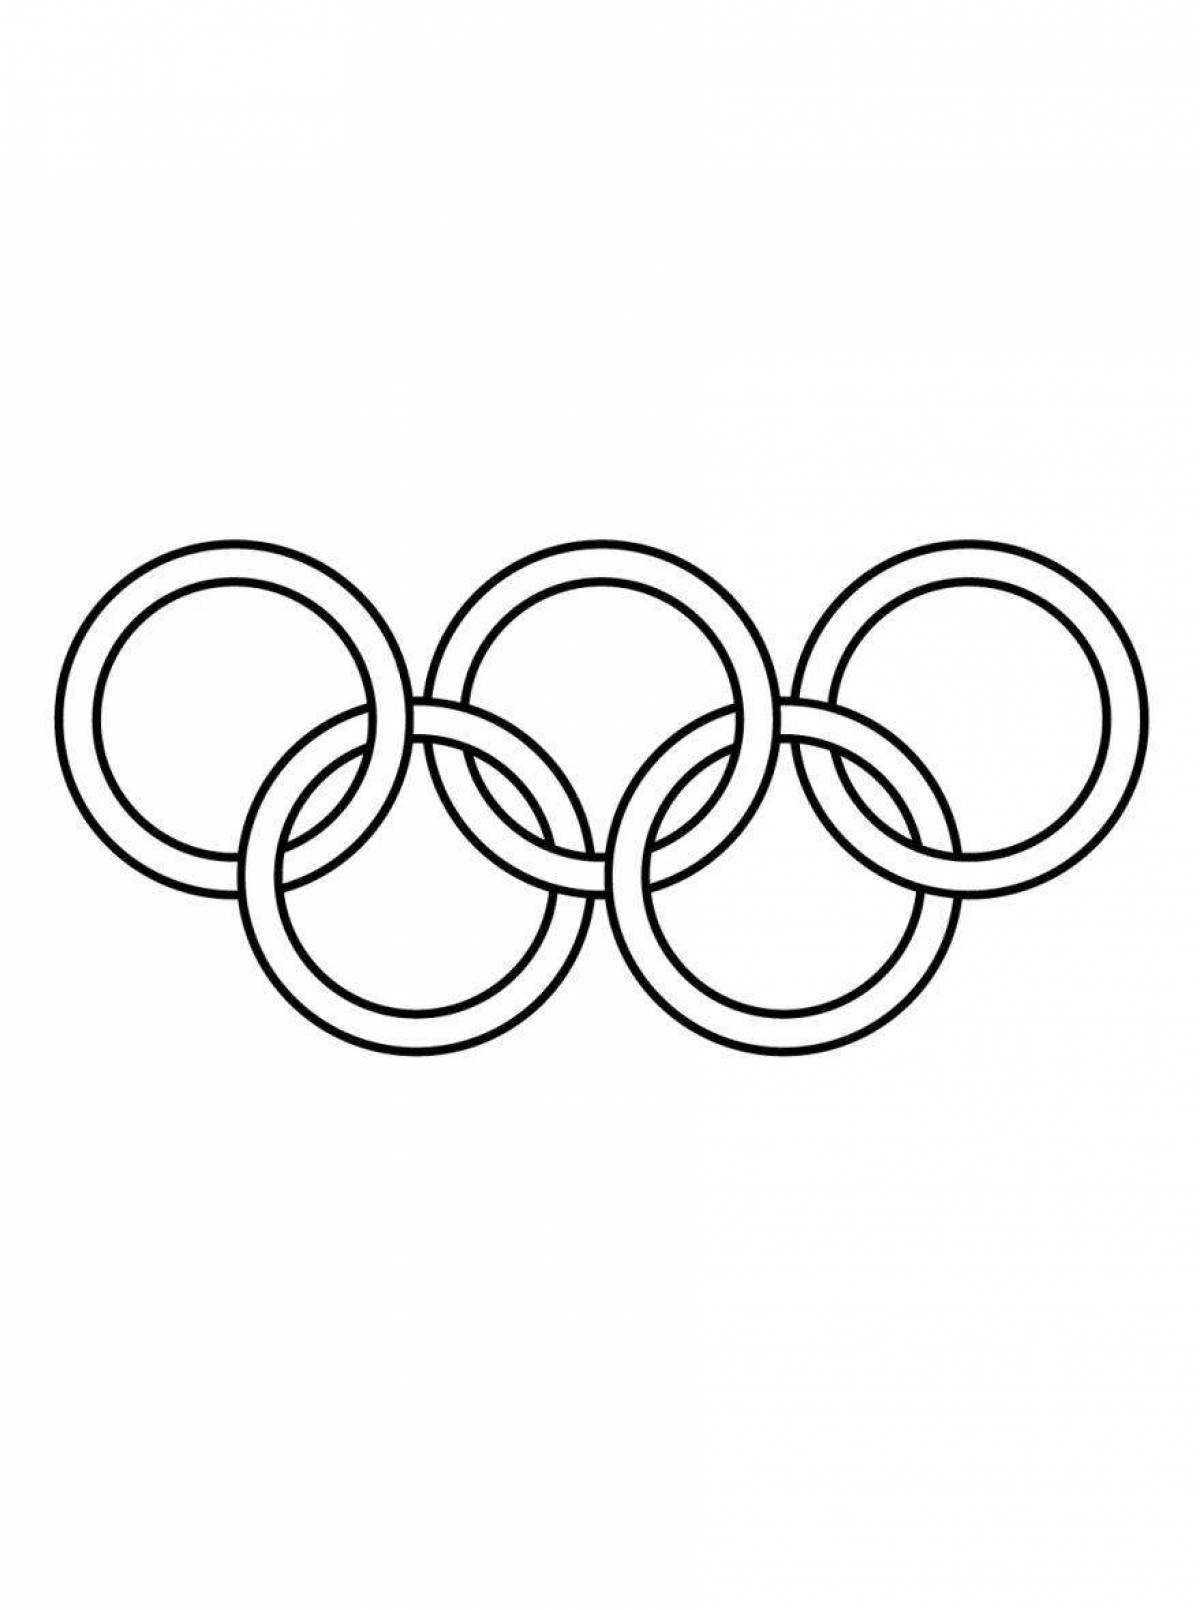 Intricate olympic rings printable coloring page